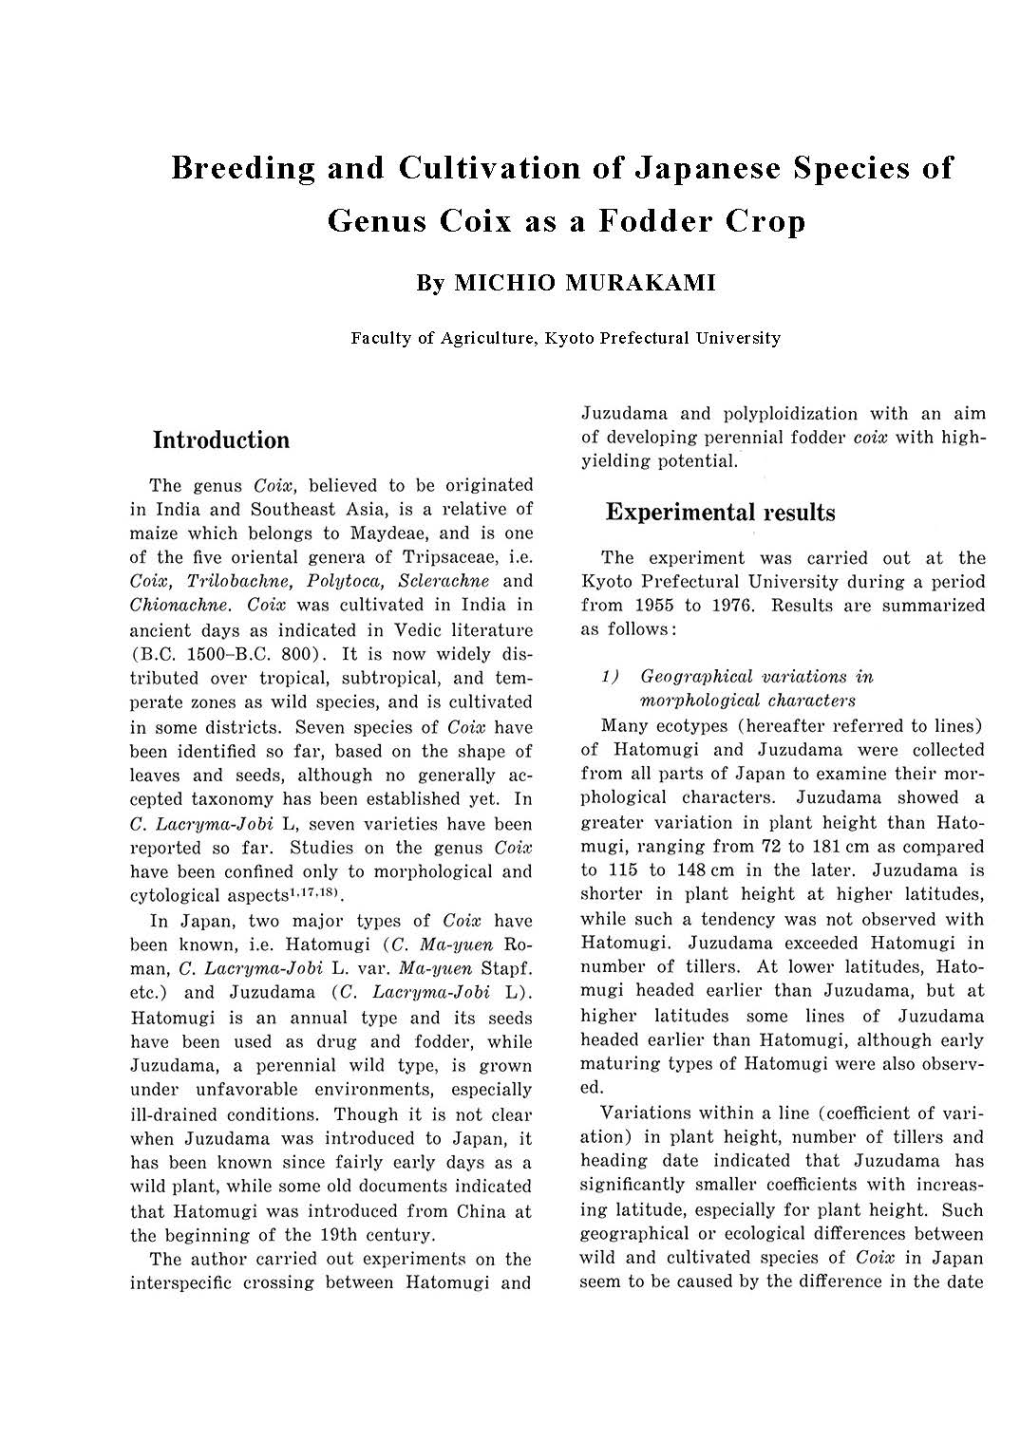 Breeding and Cultivation of Japanese Species of Genus Coix As a Fodder Crop